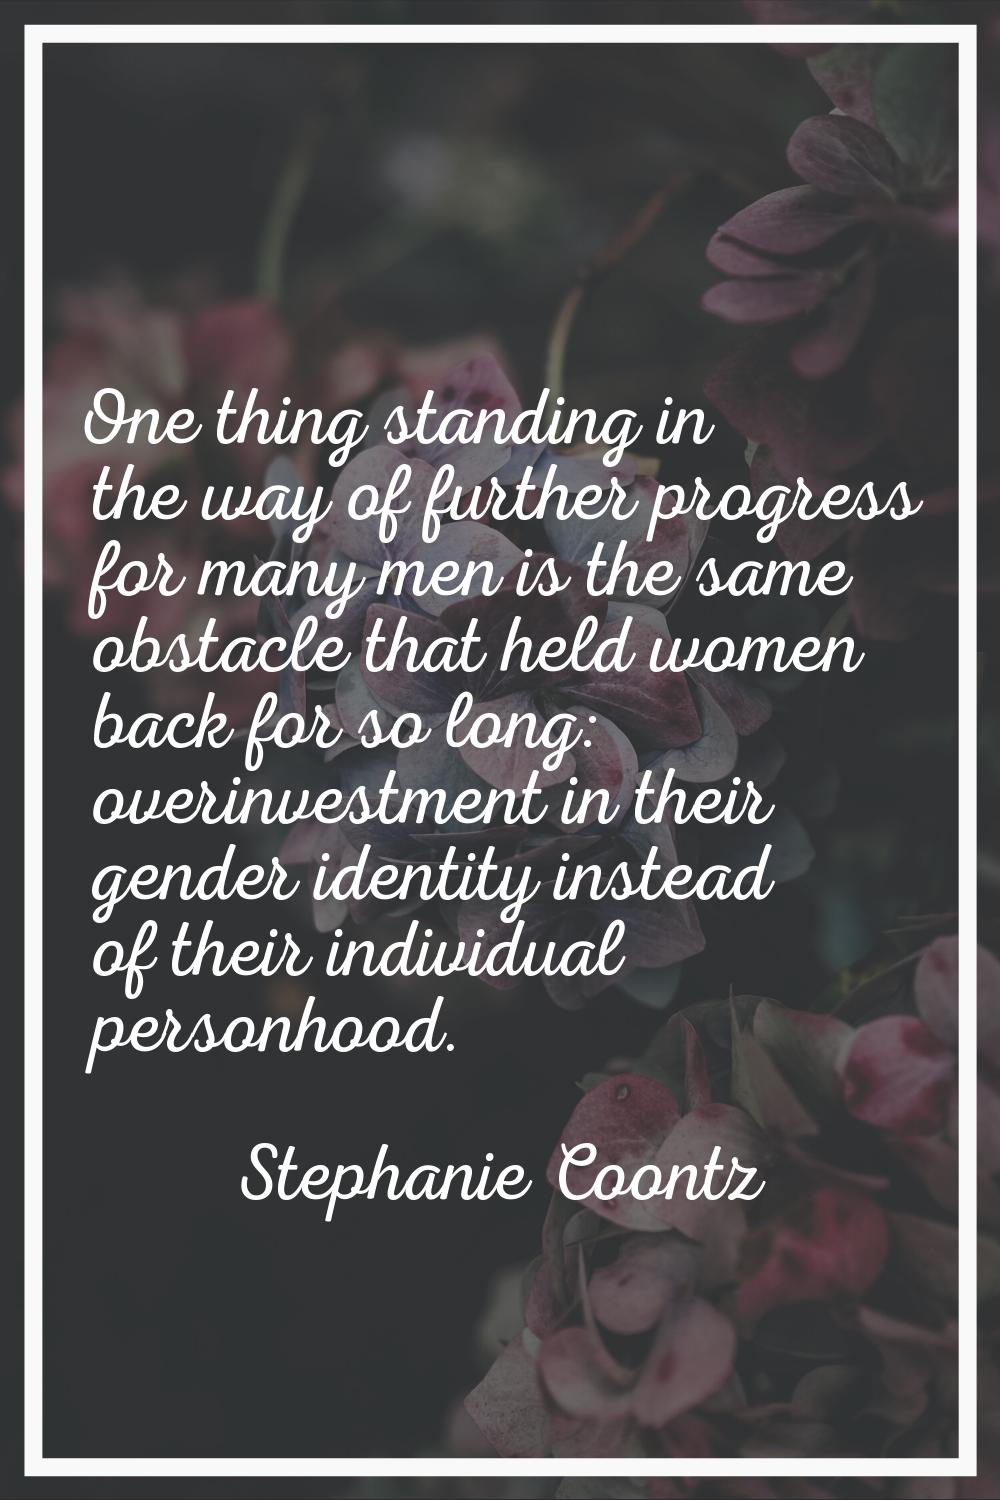 One thing standing in the way of further progress for many men is the same obstacle that held women